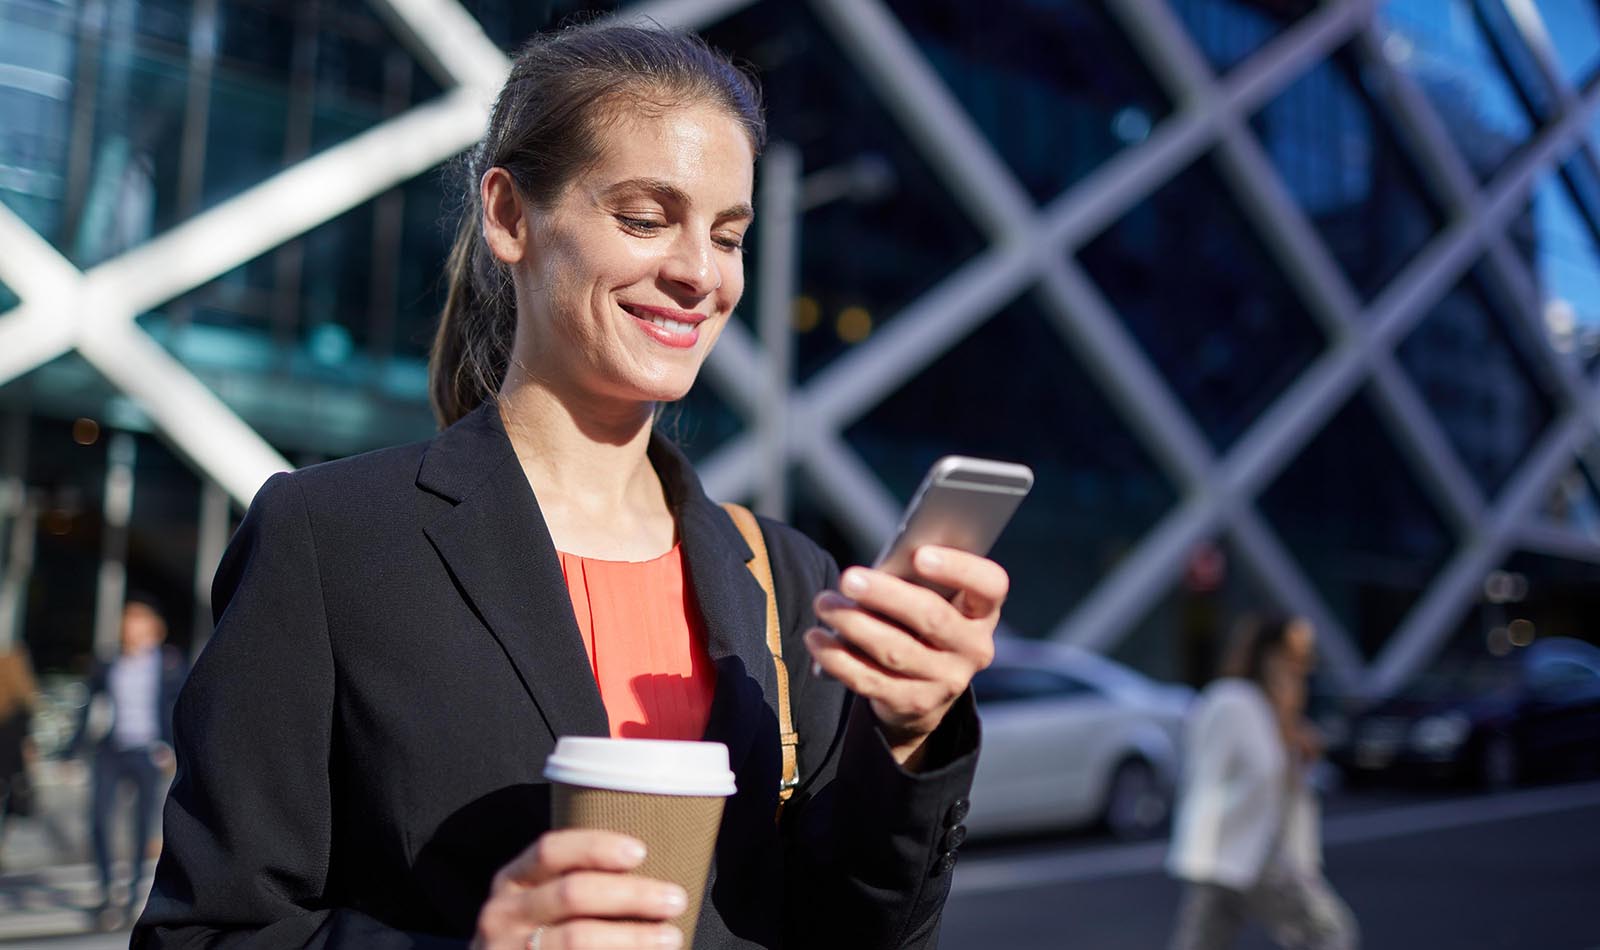 A smiling woman looks down at her phone will standing outside a building in a business district